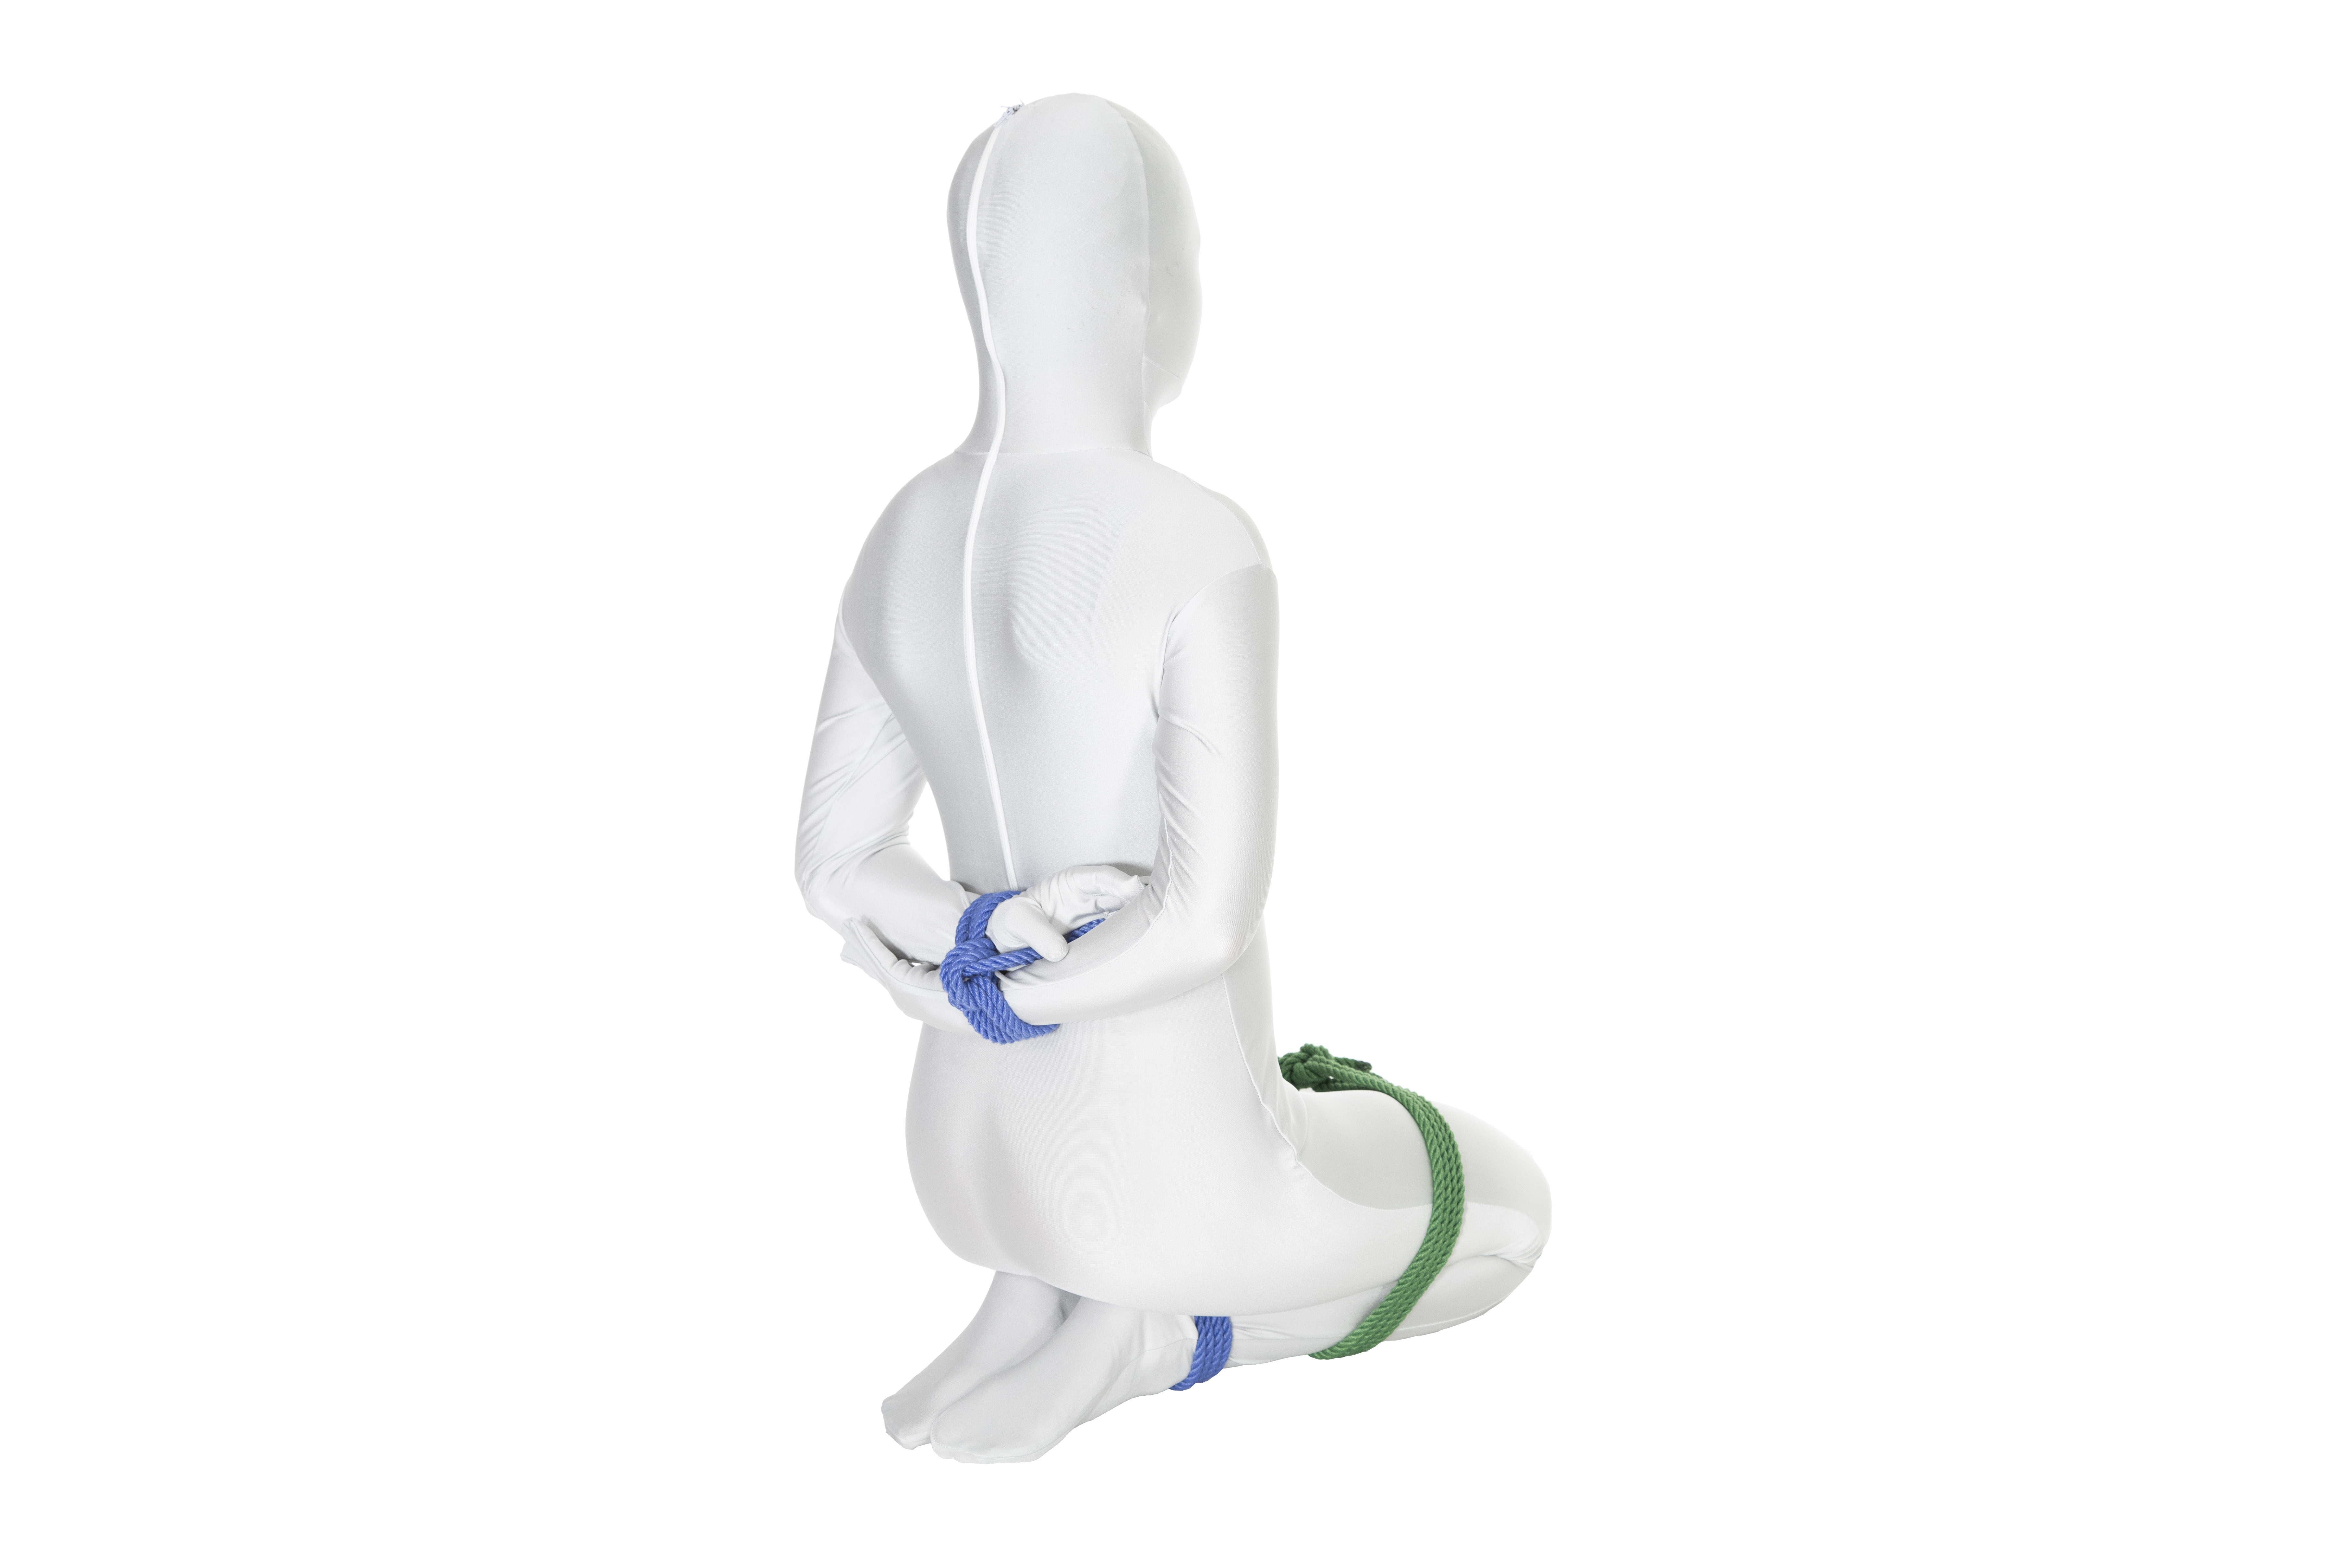 A person in a white bodysuit kneeling with their hands bound behind their back.